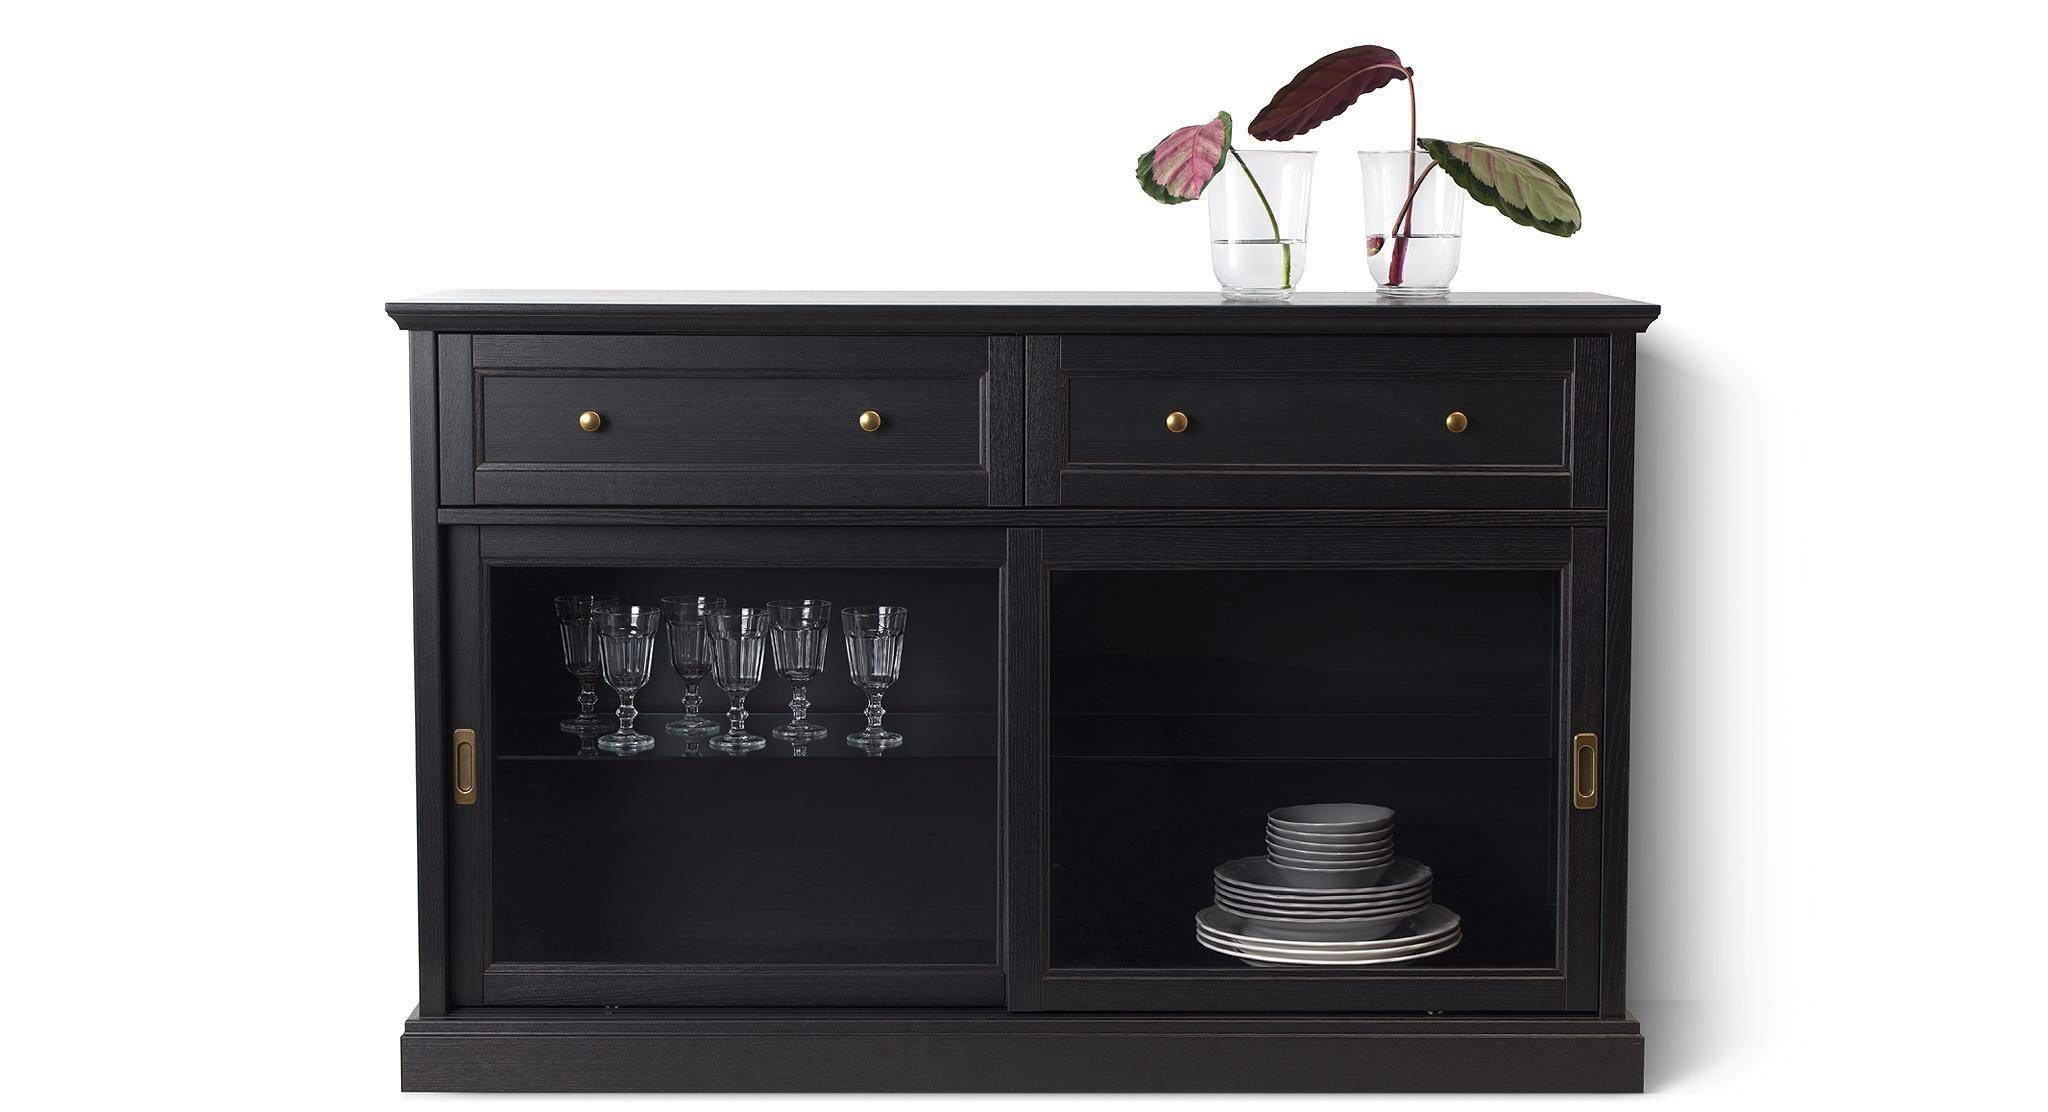 Sideboards & Buffet Cabinets | Ikea Pertaining To 2018 Ikea Sideboards (View 15 of 15)